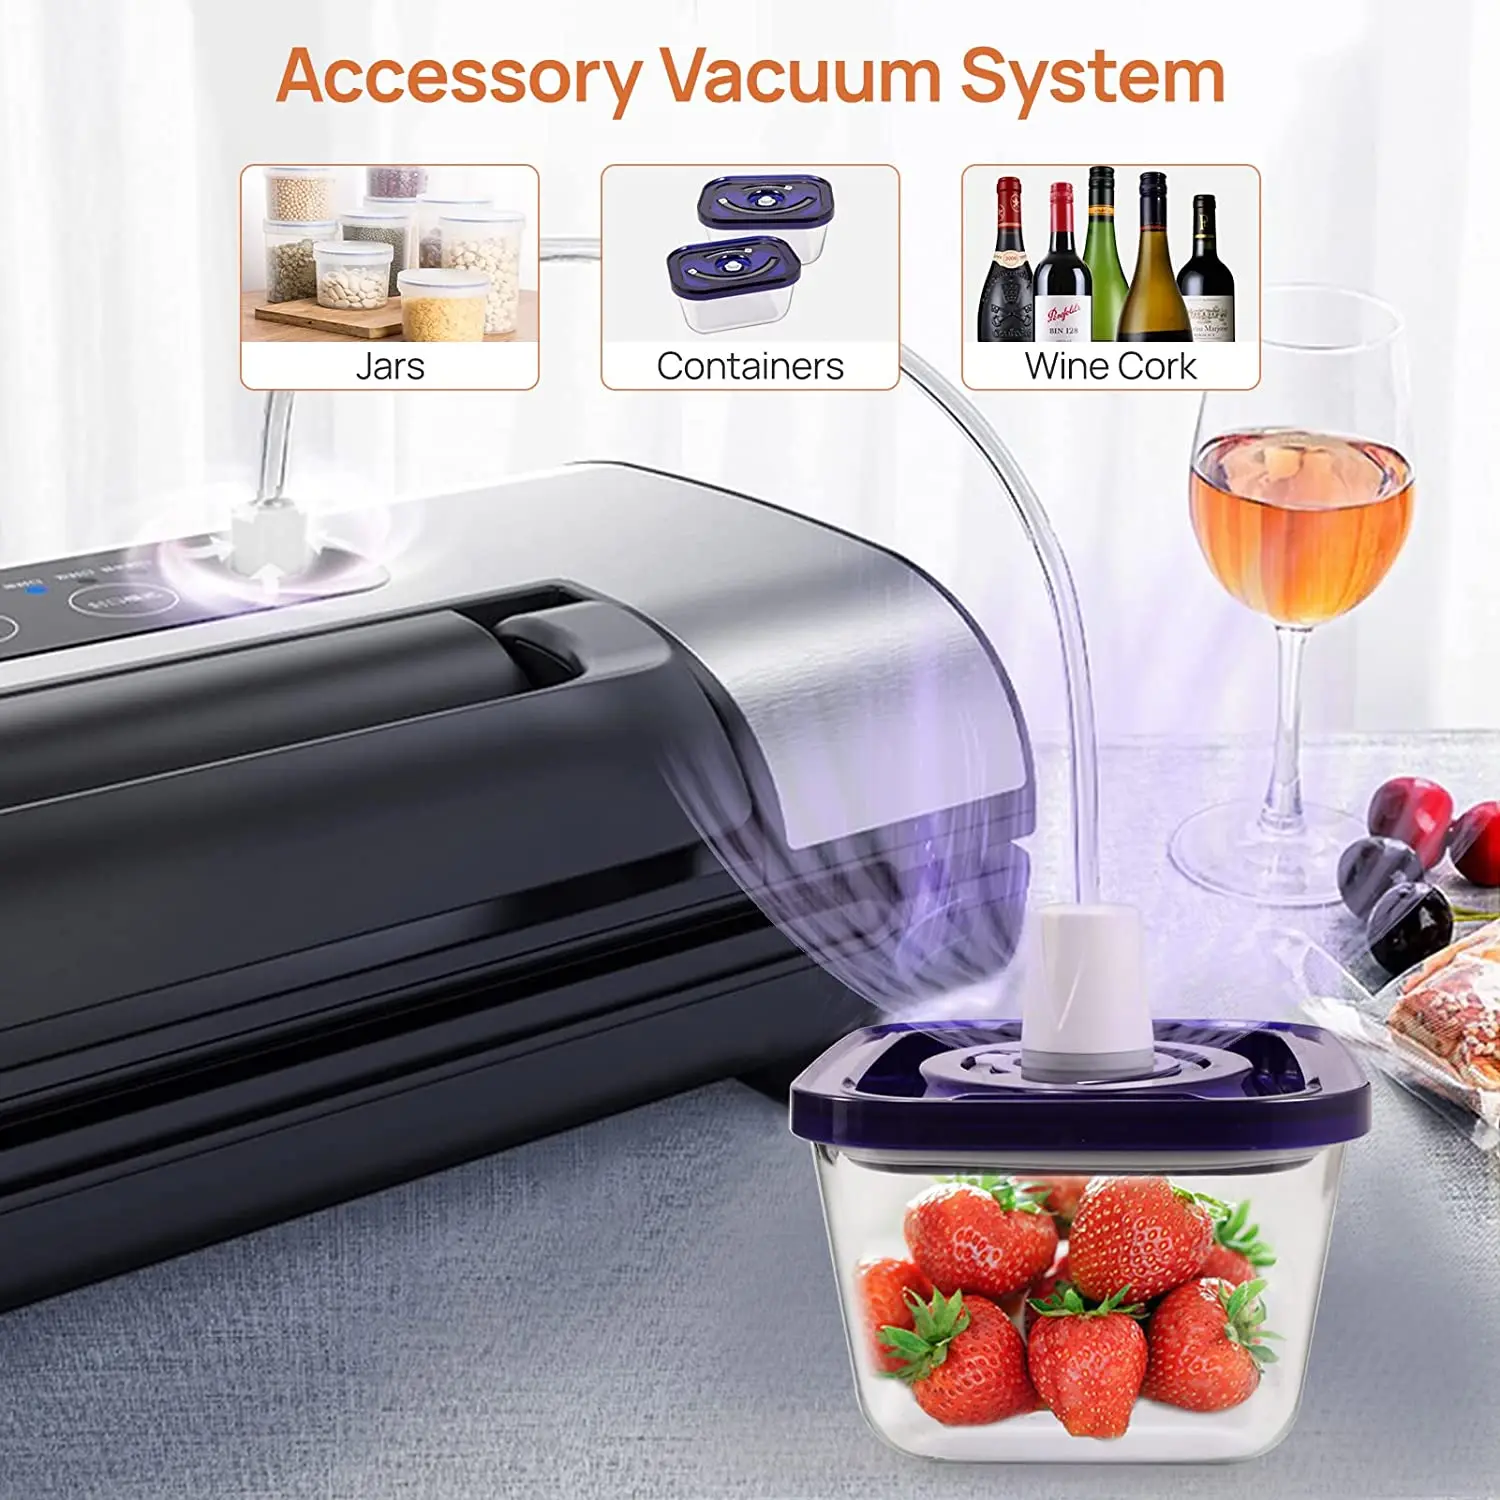 Vakumar VH5186 Kitchen Automatic Commercial Household Food Vacuum Sealer  Packaging Machine Include 2 rolls Vacuum packed bags - AliExpress